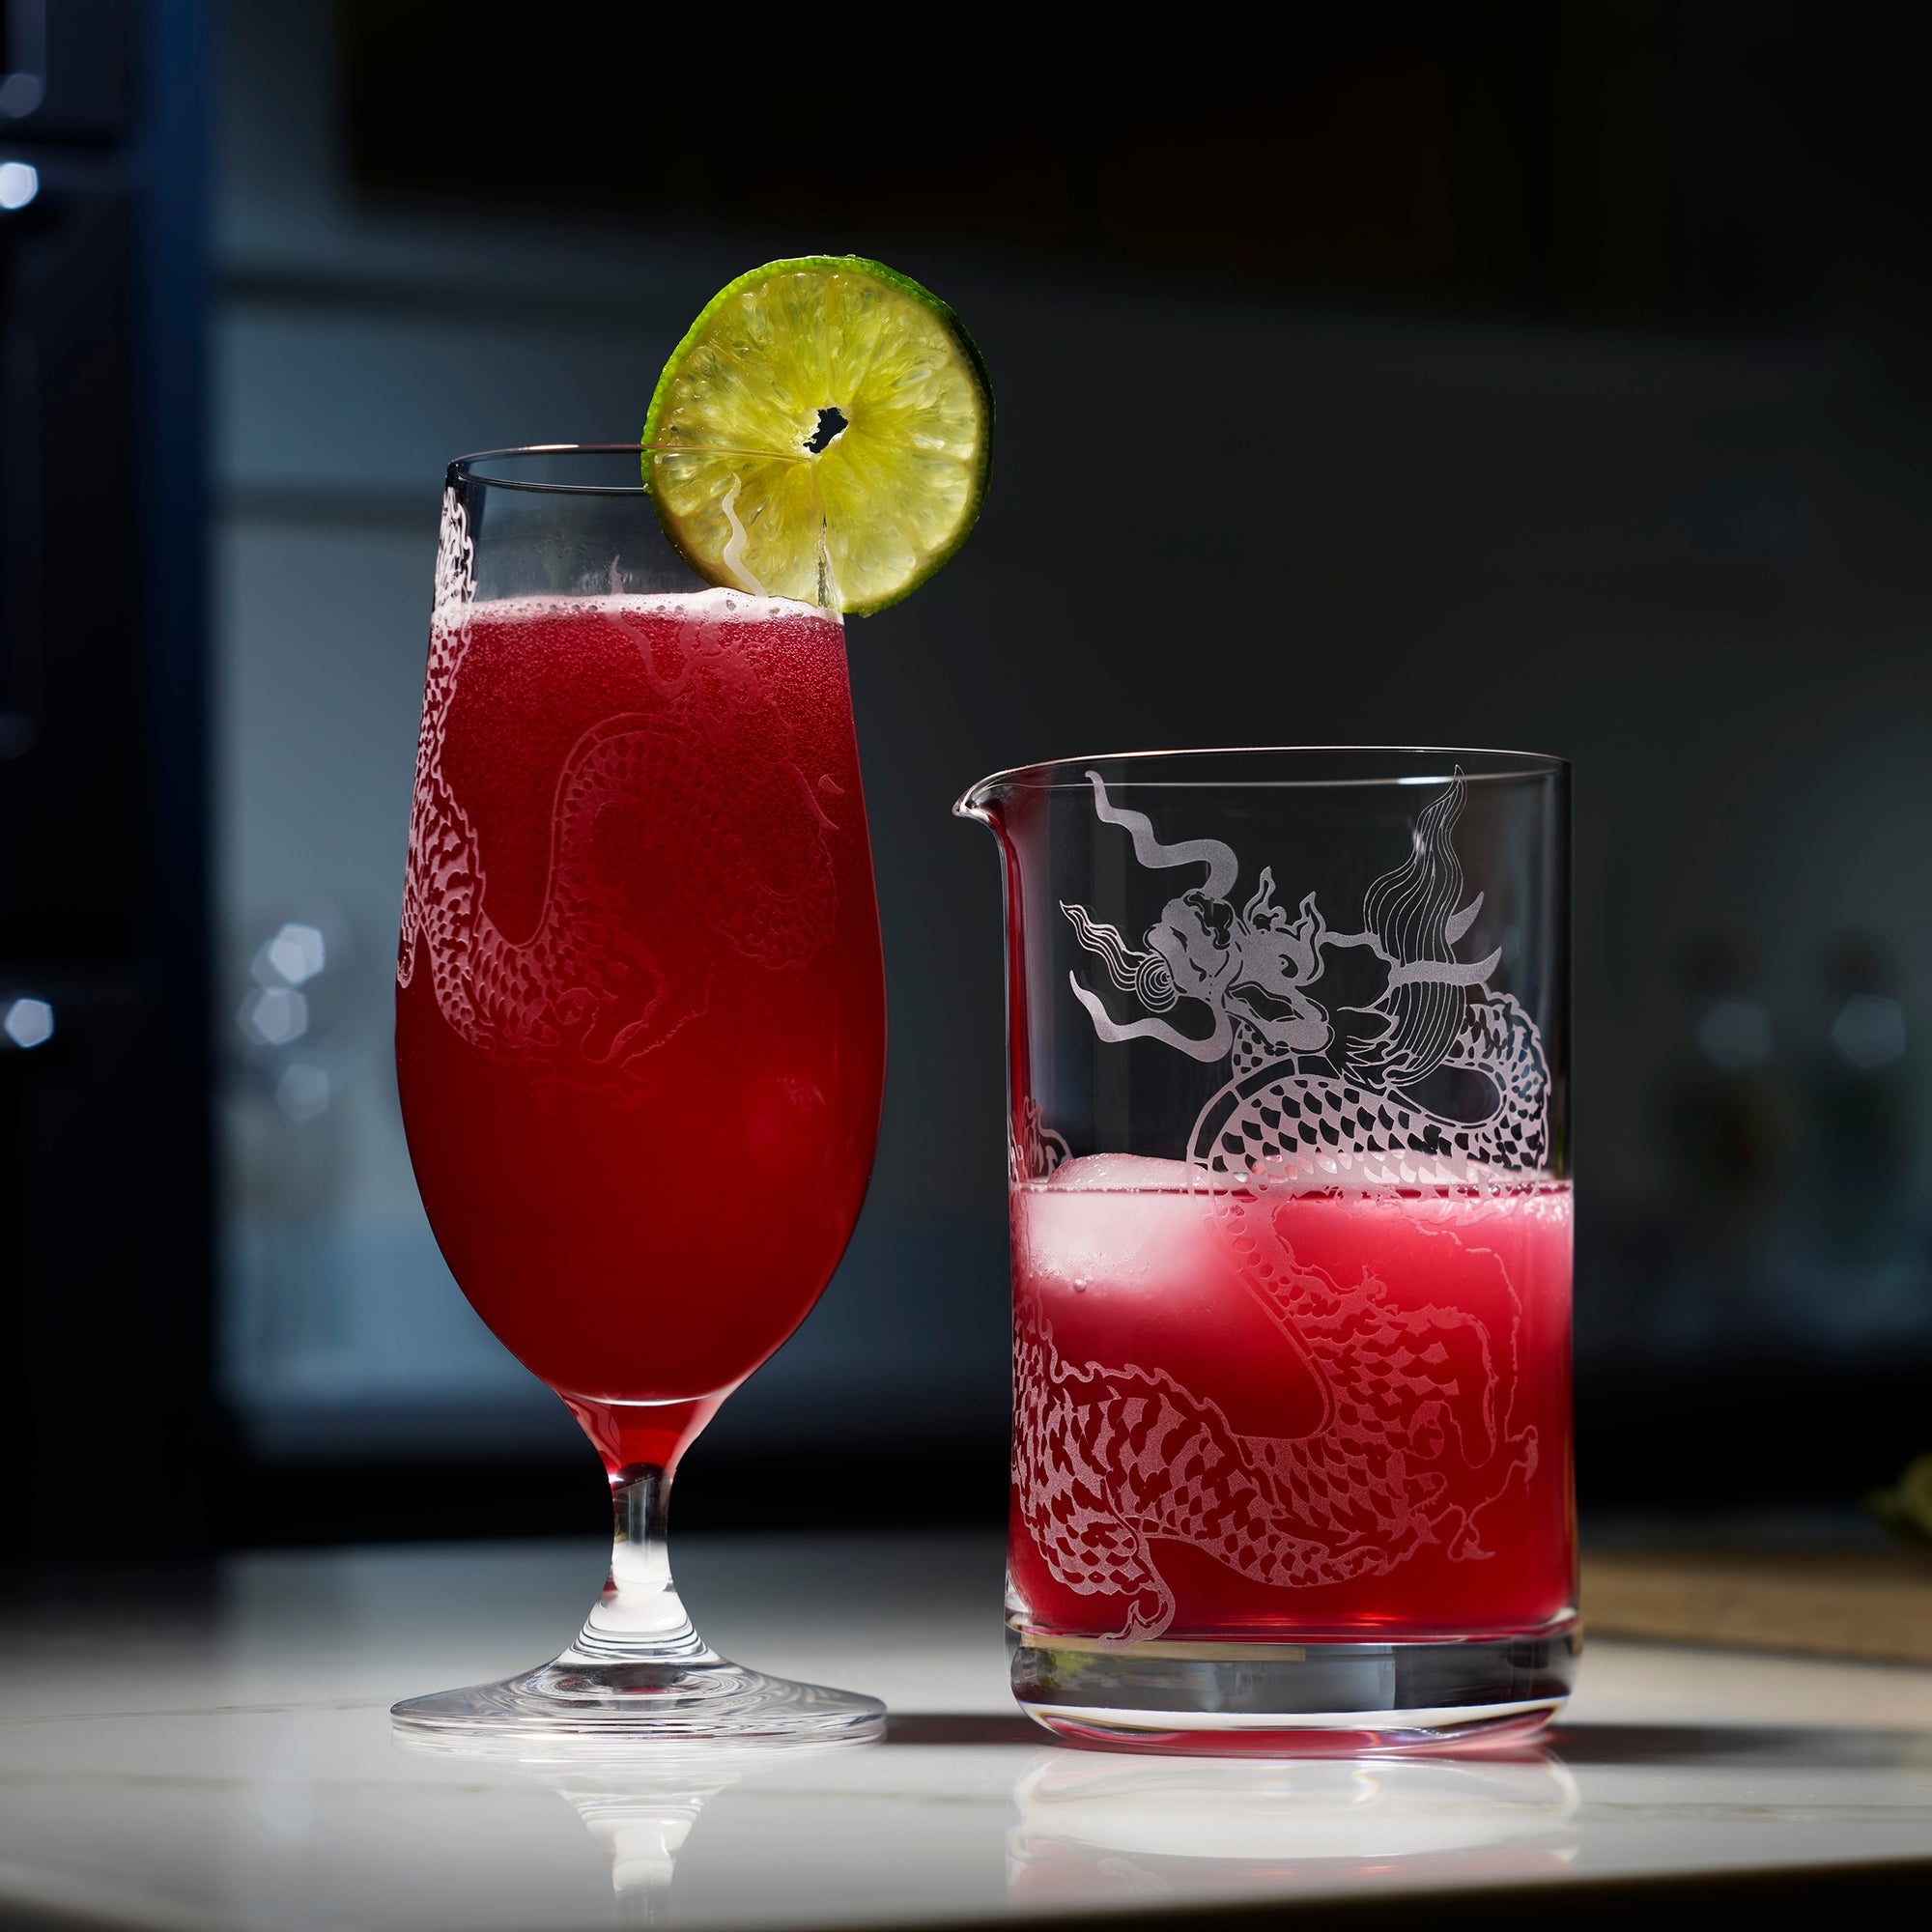 Mixing up Mojitos with a Blackberry Twist